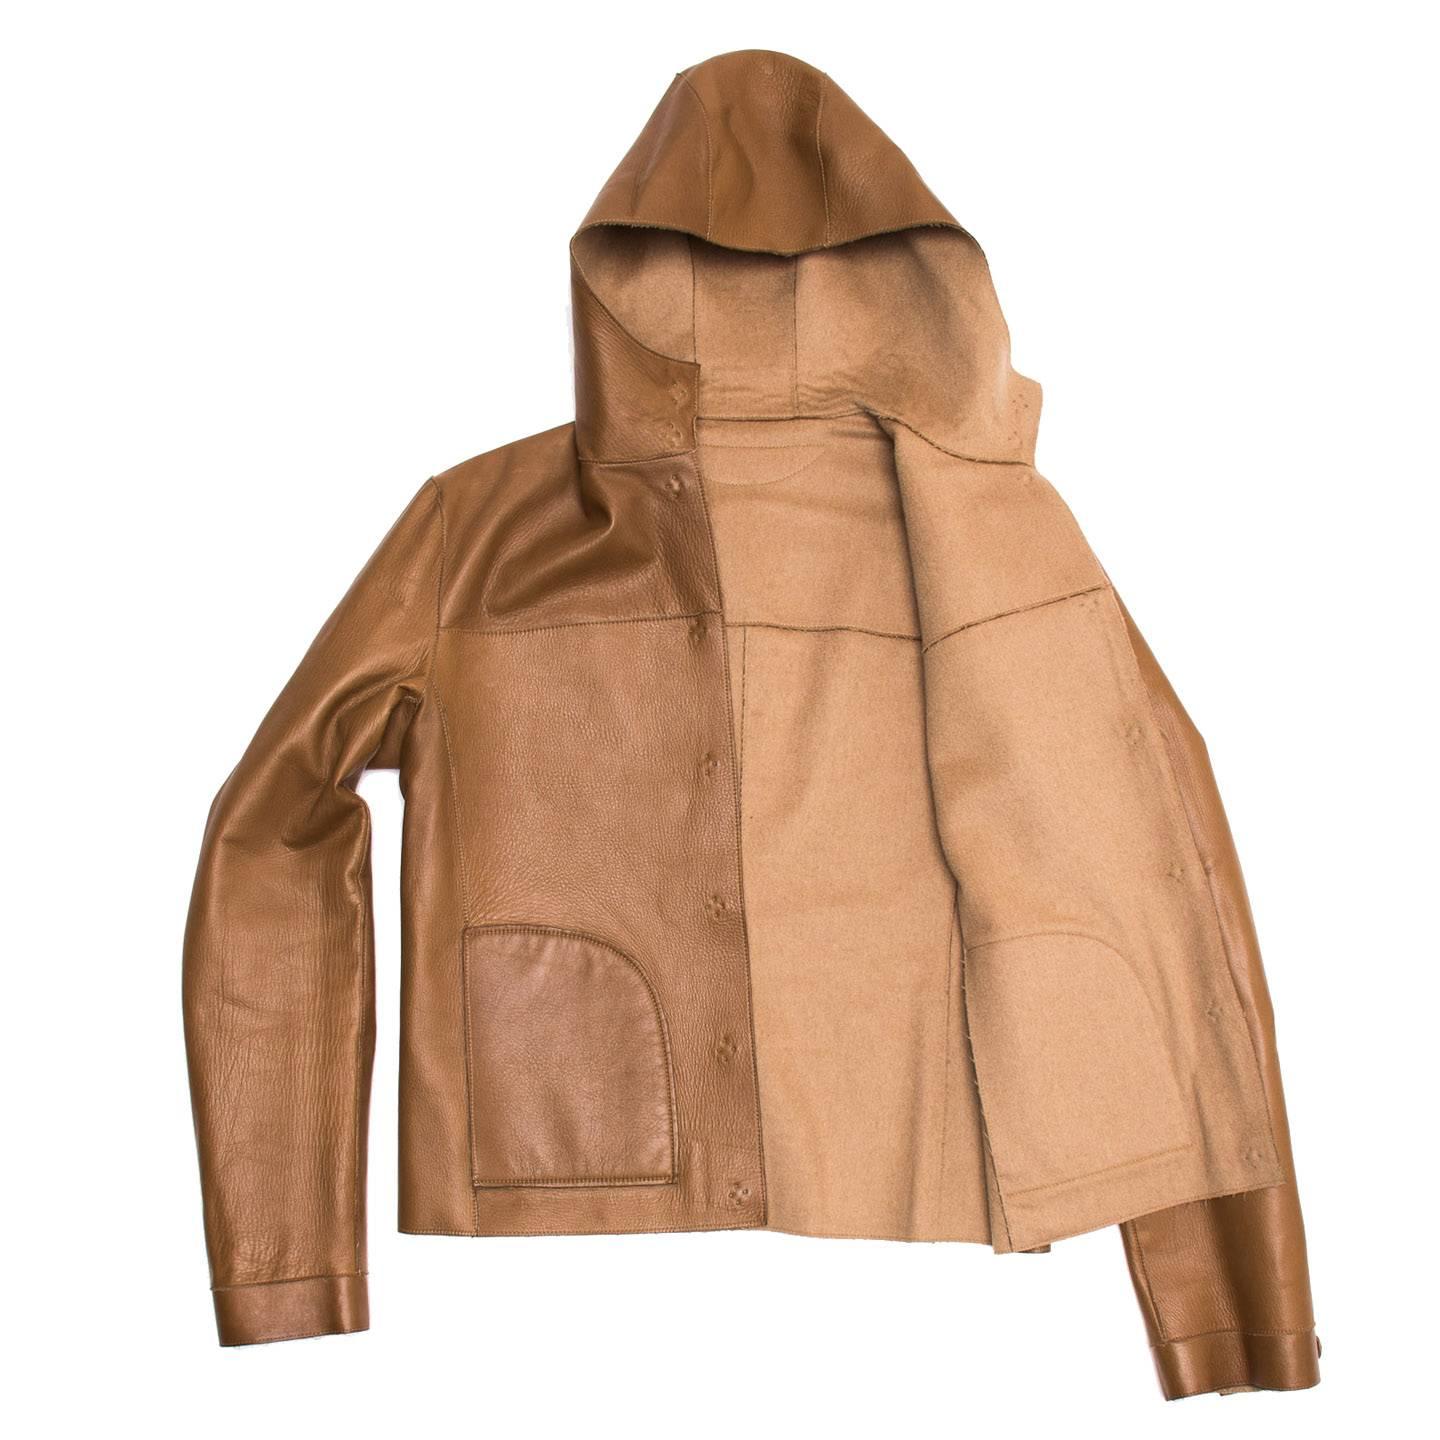 Camel cropped hooded jacket in a soft supple leather reversible to camel hair. Concealed snaps on camel hair side with inseam pockets. Single concealed snap at cuff. Made in Italy.

Size  44 Italian sizing

Condition  Excellent: worn a few times